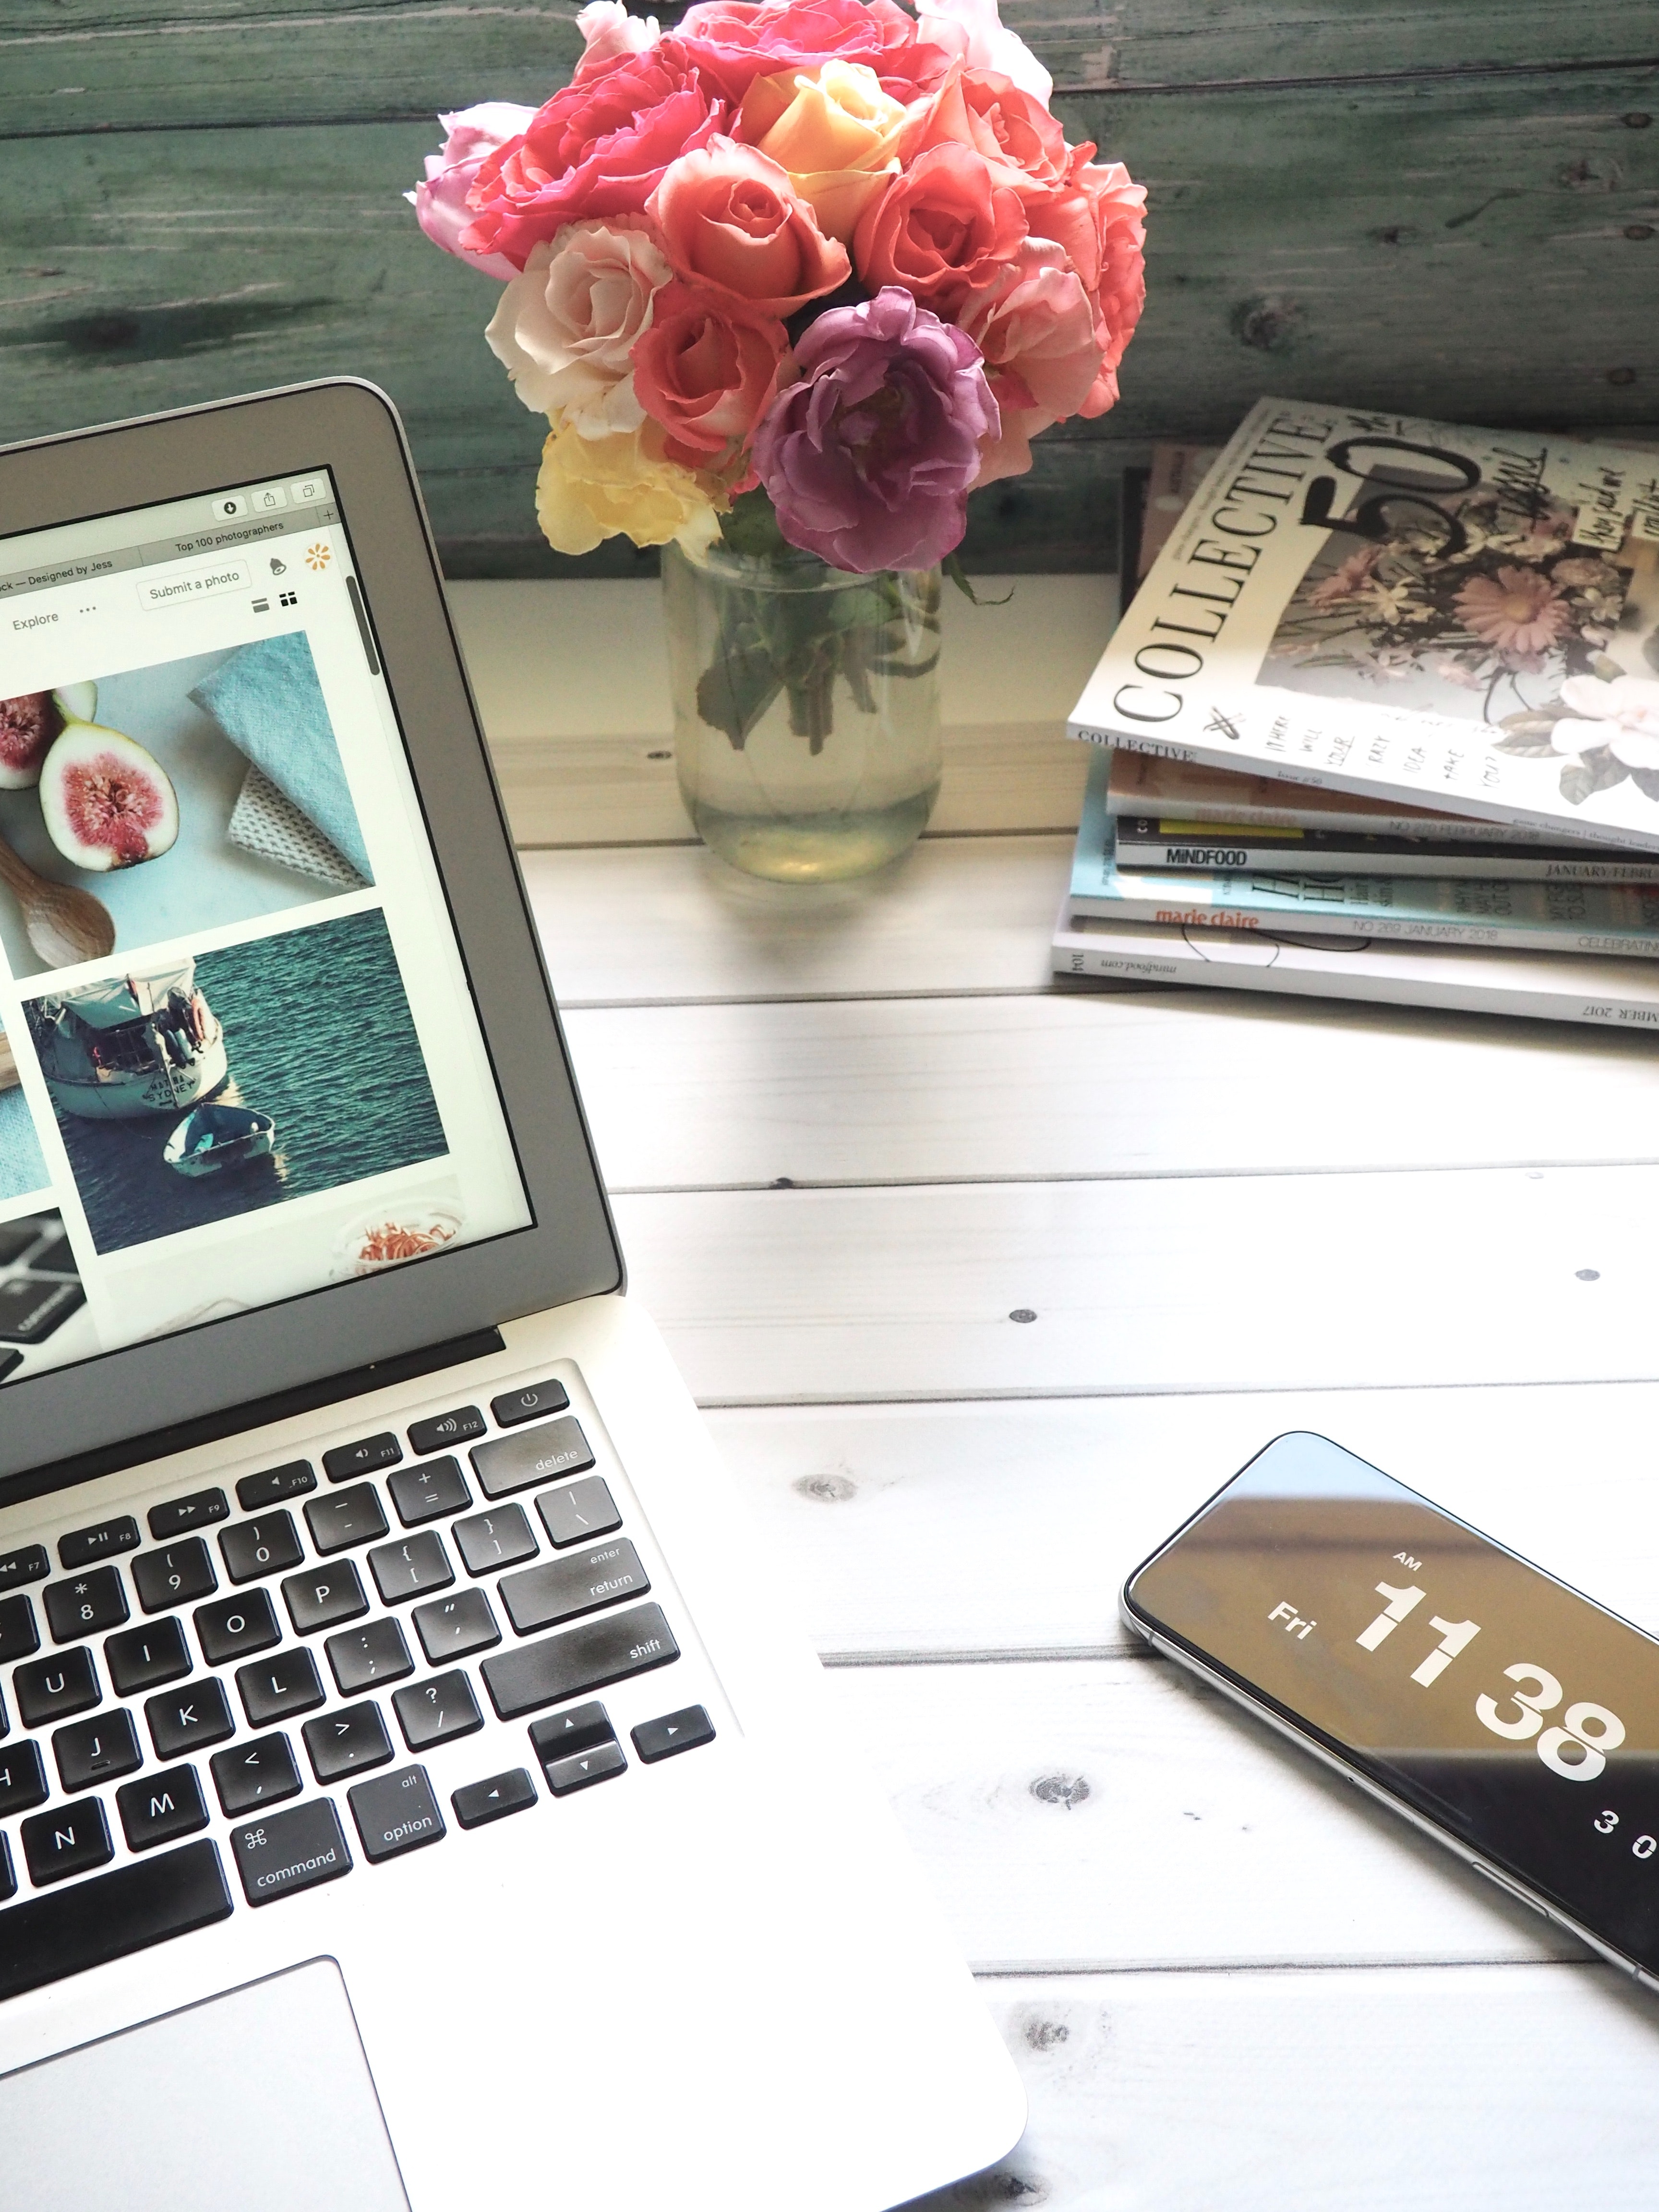 Macbook Air, Flower Bouquet and Magazines on White Table, Blog, Workplace, Working, Work, HQ Photo